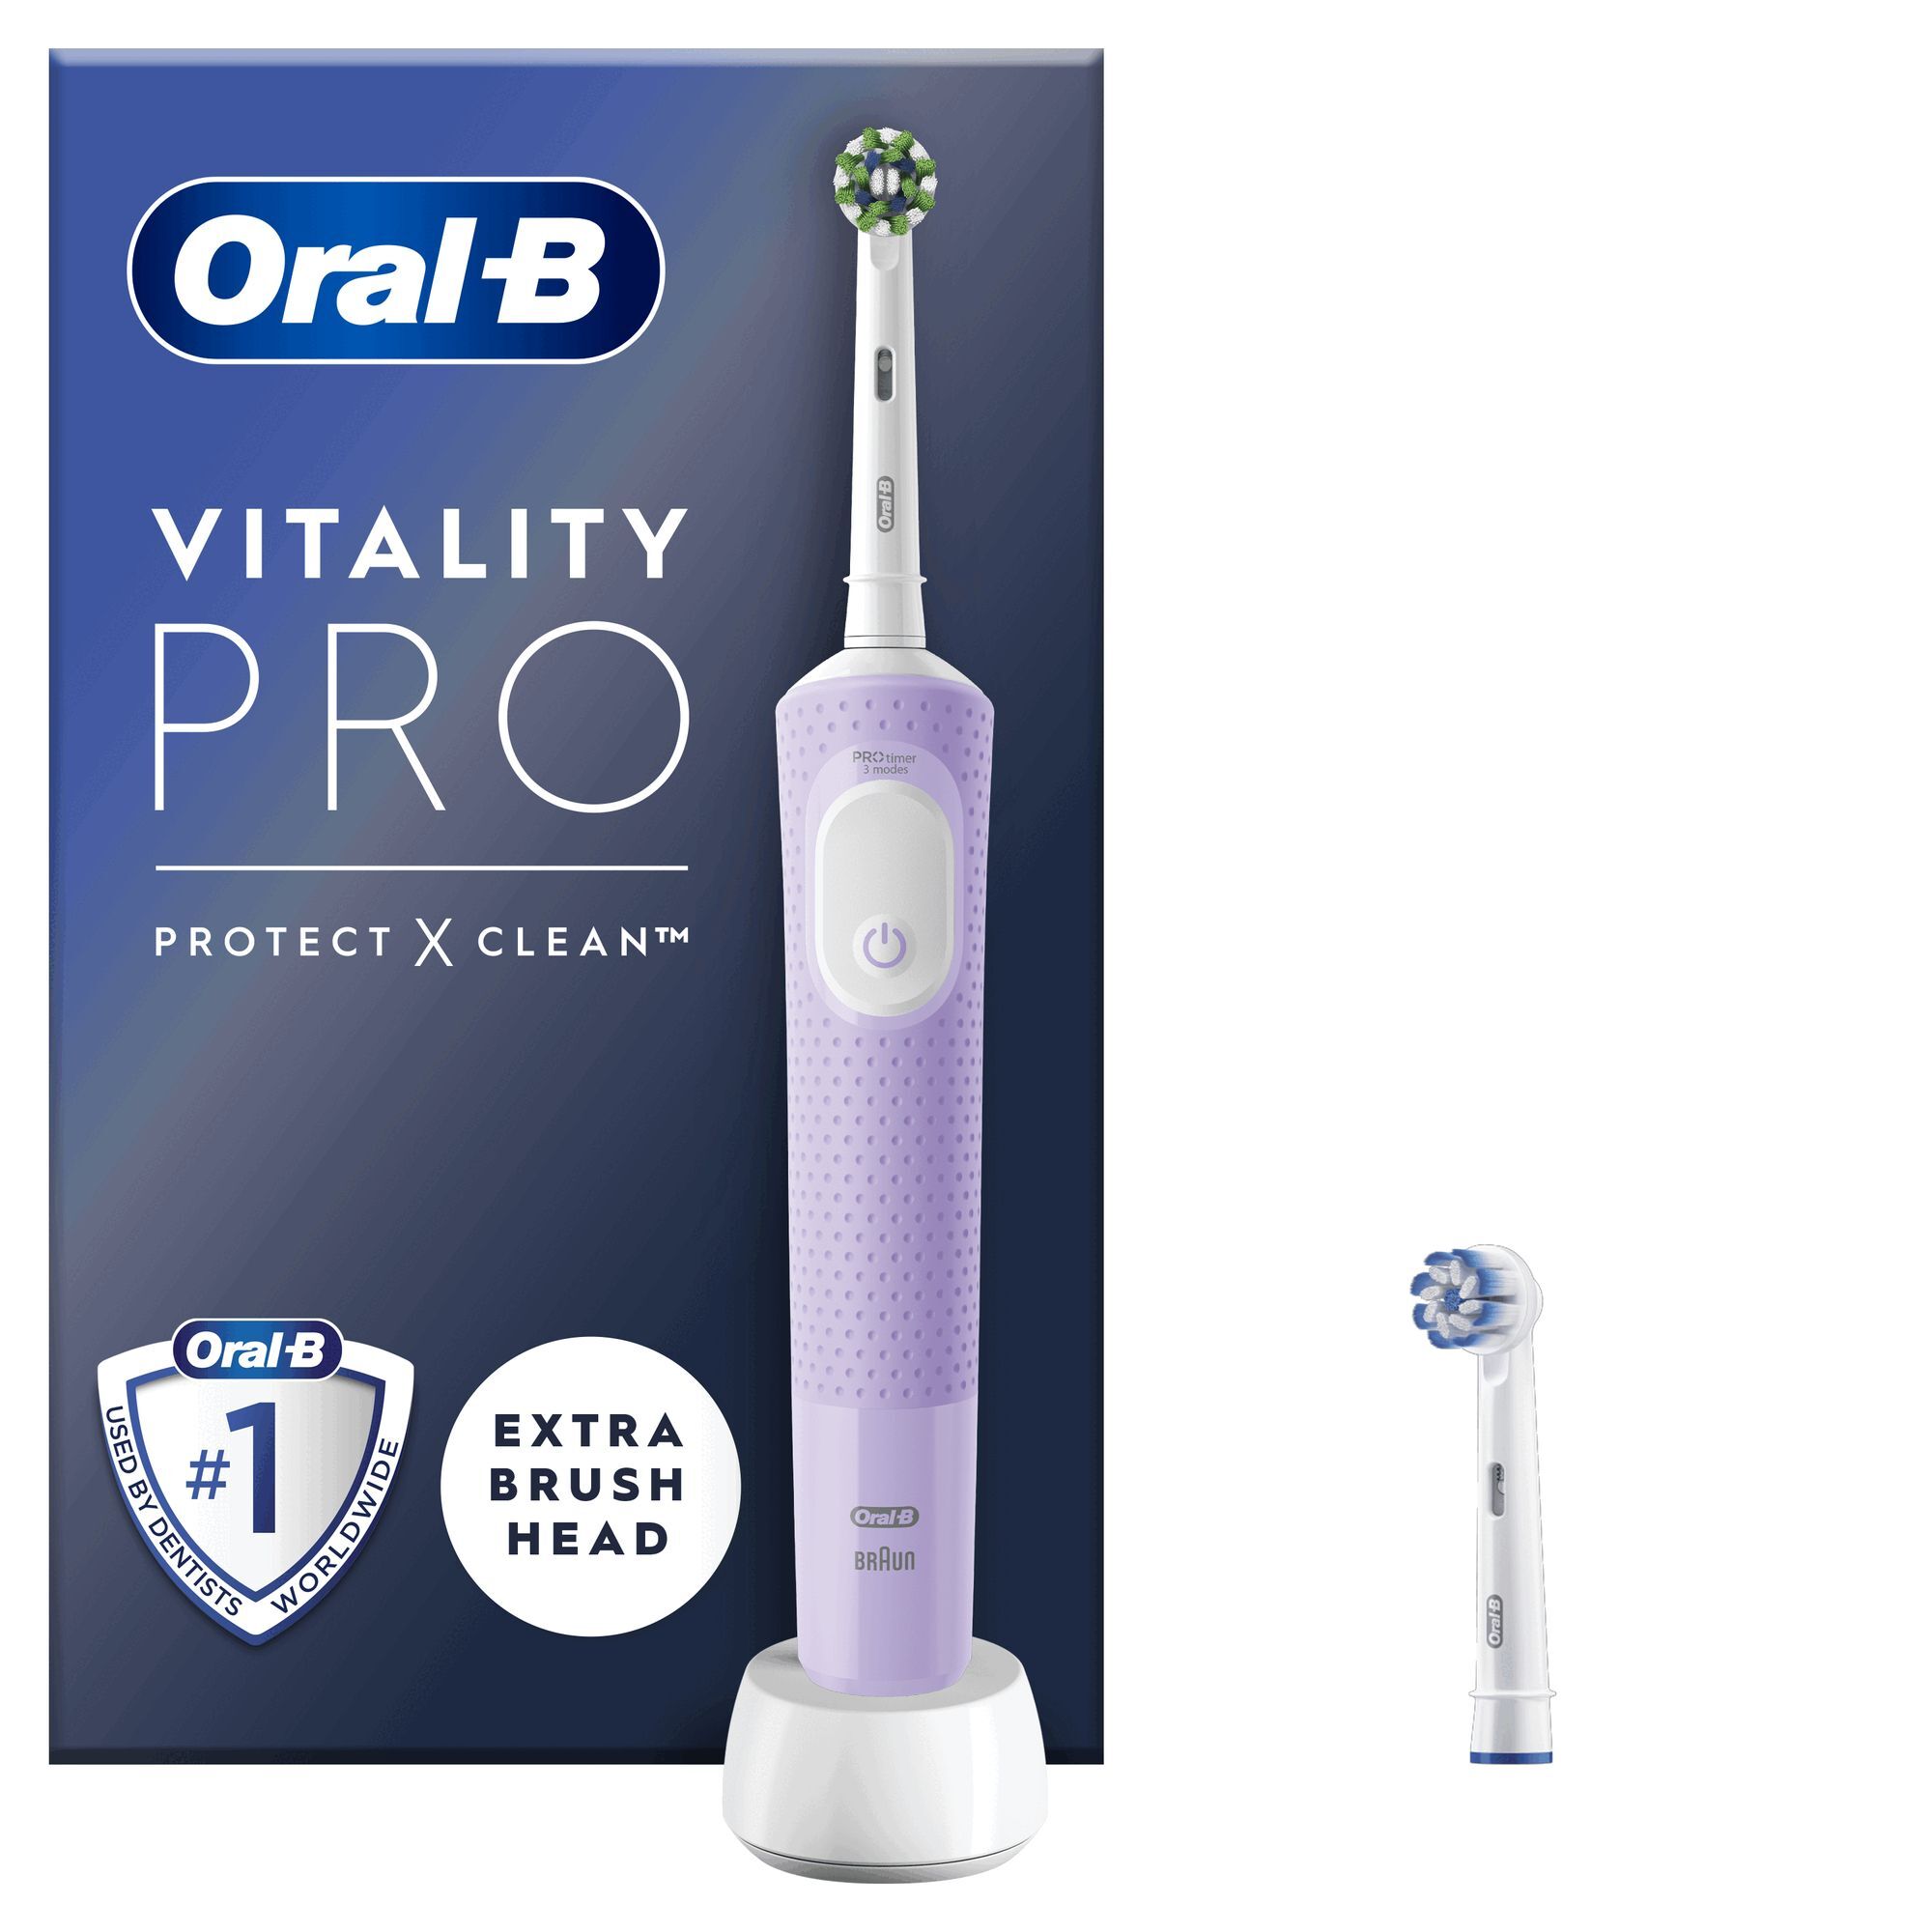 Oral-B Vitality Pro paars